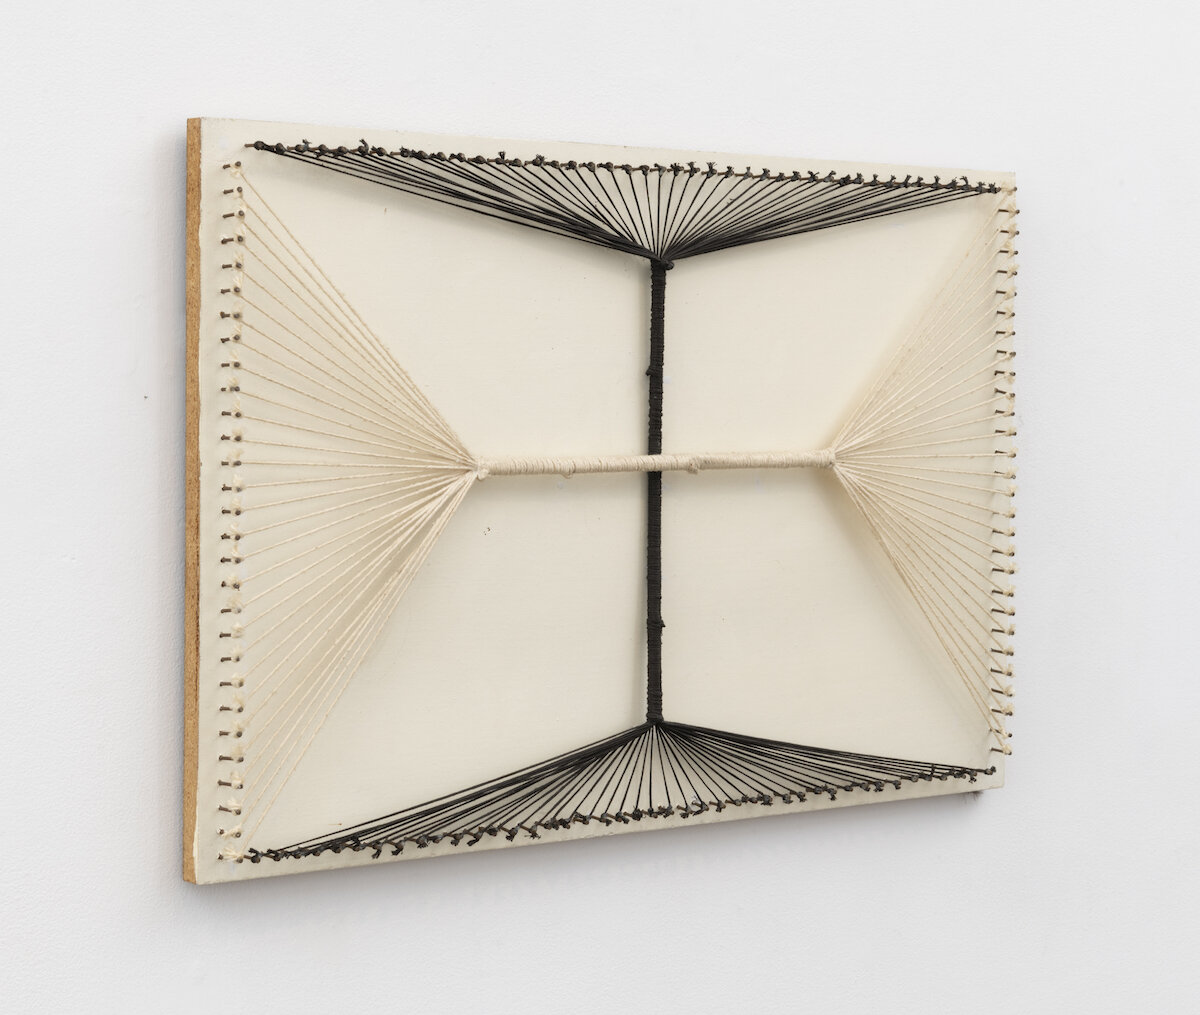   Maquette for Egypt , 1973-75, painted wood, string, nails, 23.25 x 15.5 in, Image courtesy of the Sol LeWitt Collection 